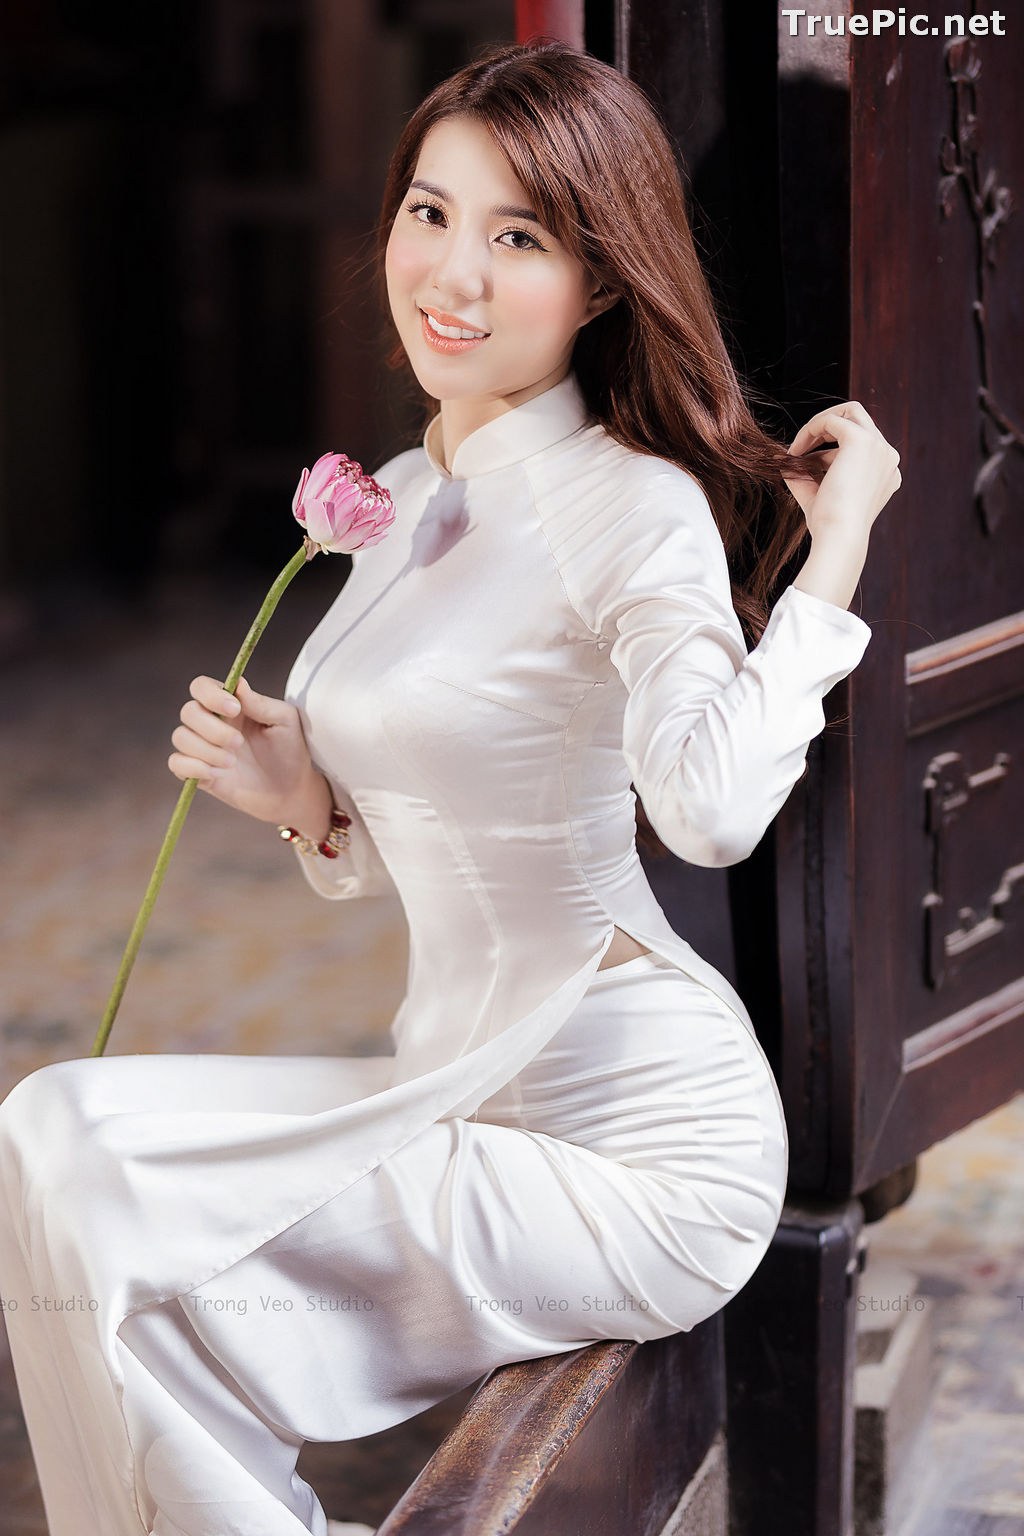 Image The Beauty of Vietnamese Girls with Traditional Dress (Ao Dai) #3 - TruePic.net - Picture-74